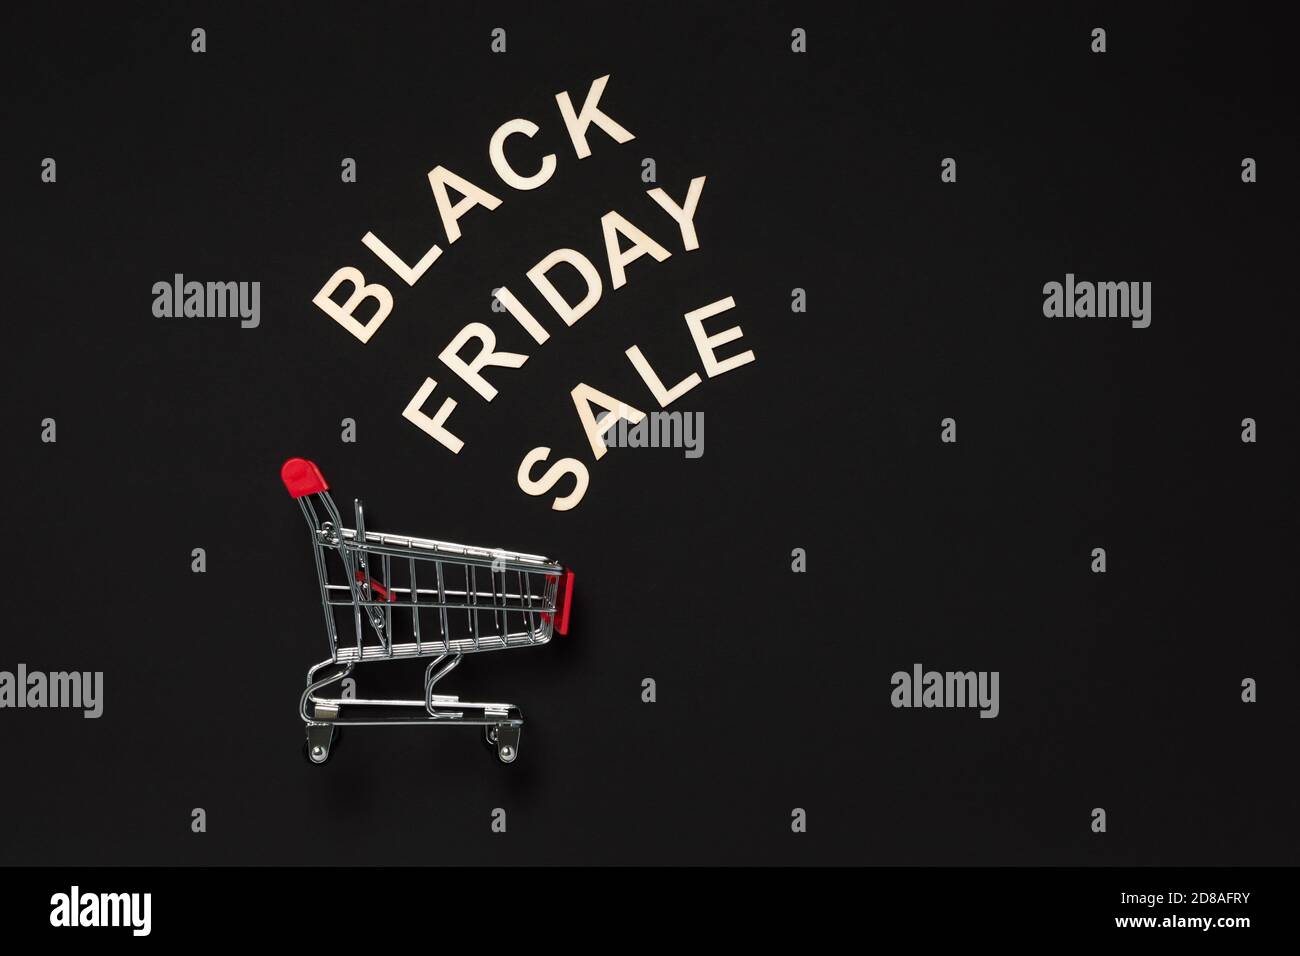 Black Friday sale word made with wooden letters above red shopping cart on dark background. Shopping, commerce and sale concept. Flat lay banner with Stock Photo